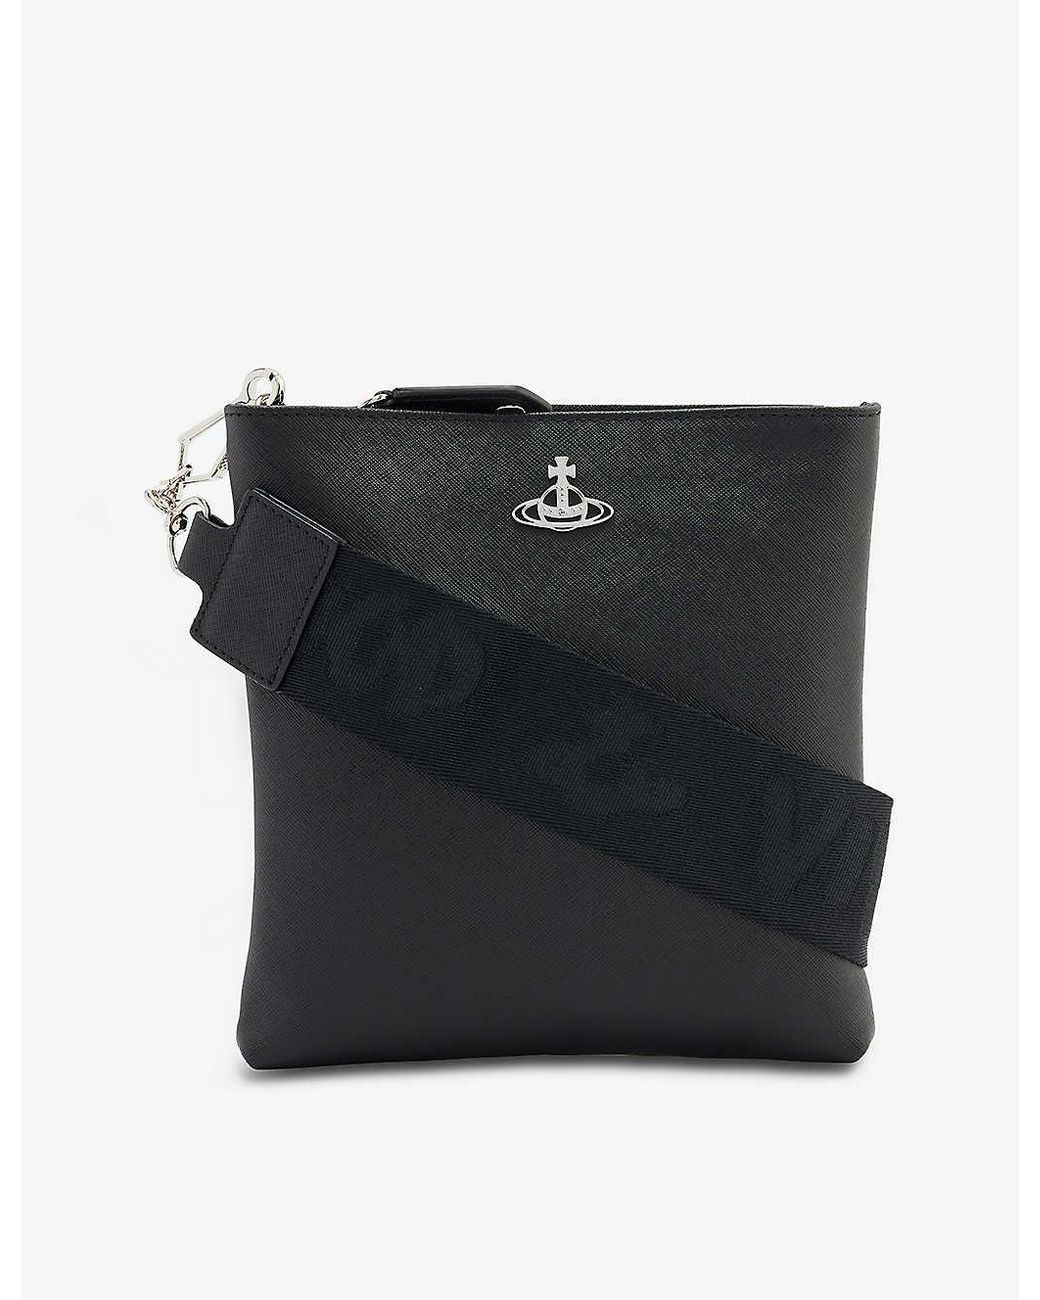 Vivienne Westwood Squire Leather Cross-body Bag in Black for Men | Lyst UK